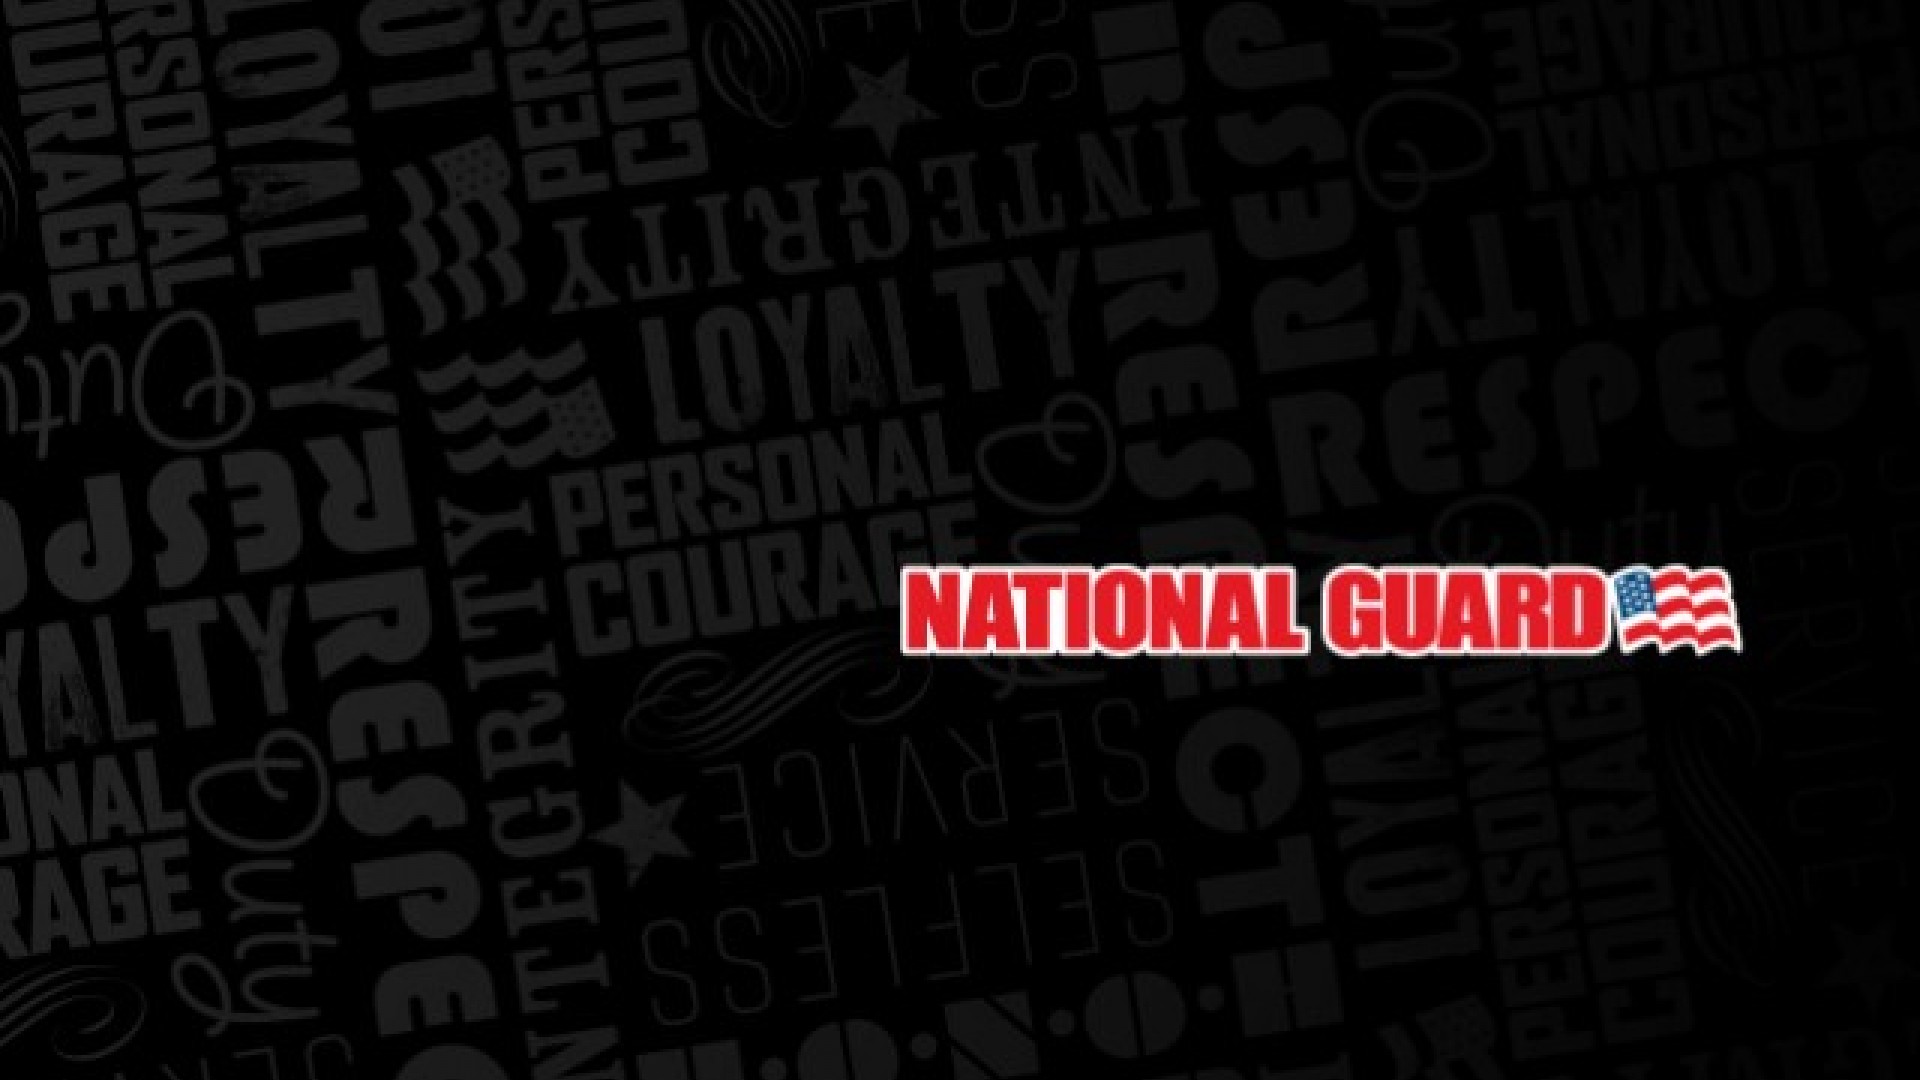 Other Resolution Army National Guard Wallpaper Panda